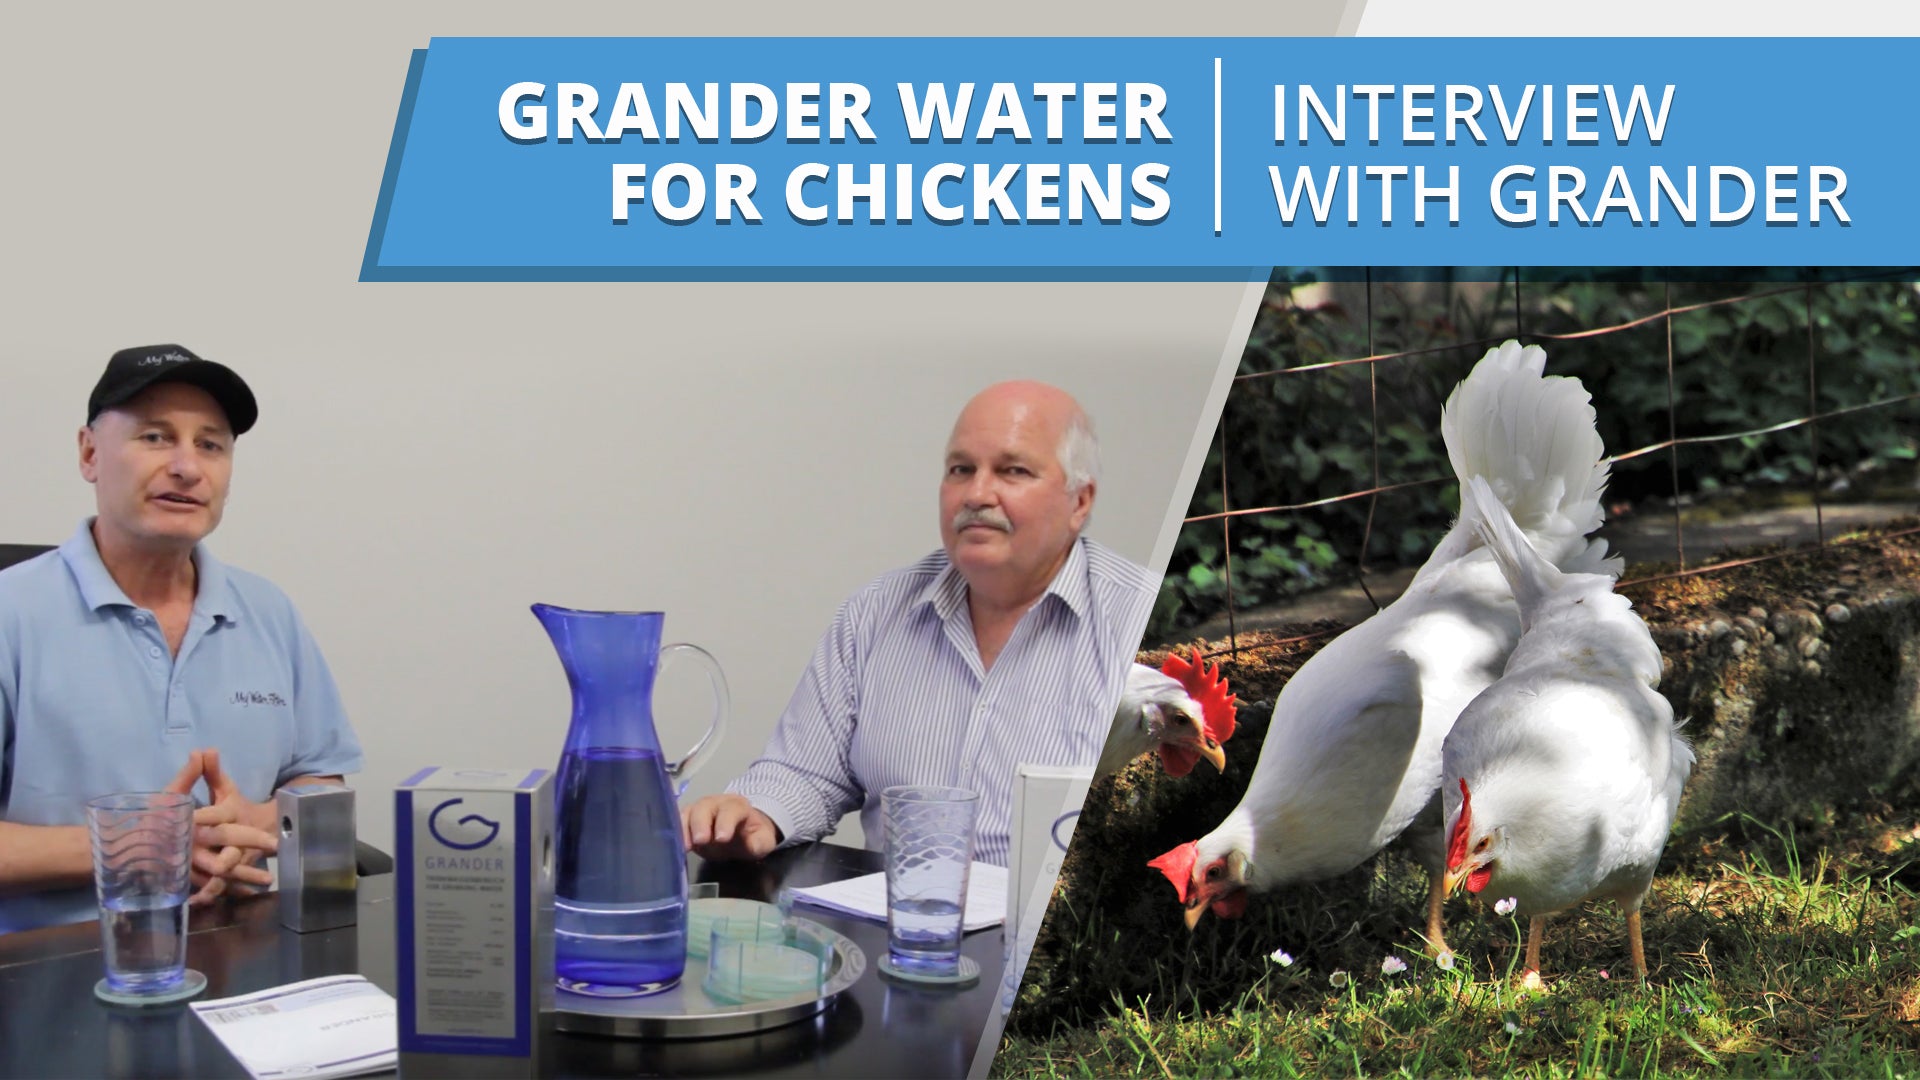 [VIDEO] Grander Water for Chickens - Interview with Wayne from Grander